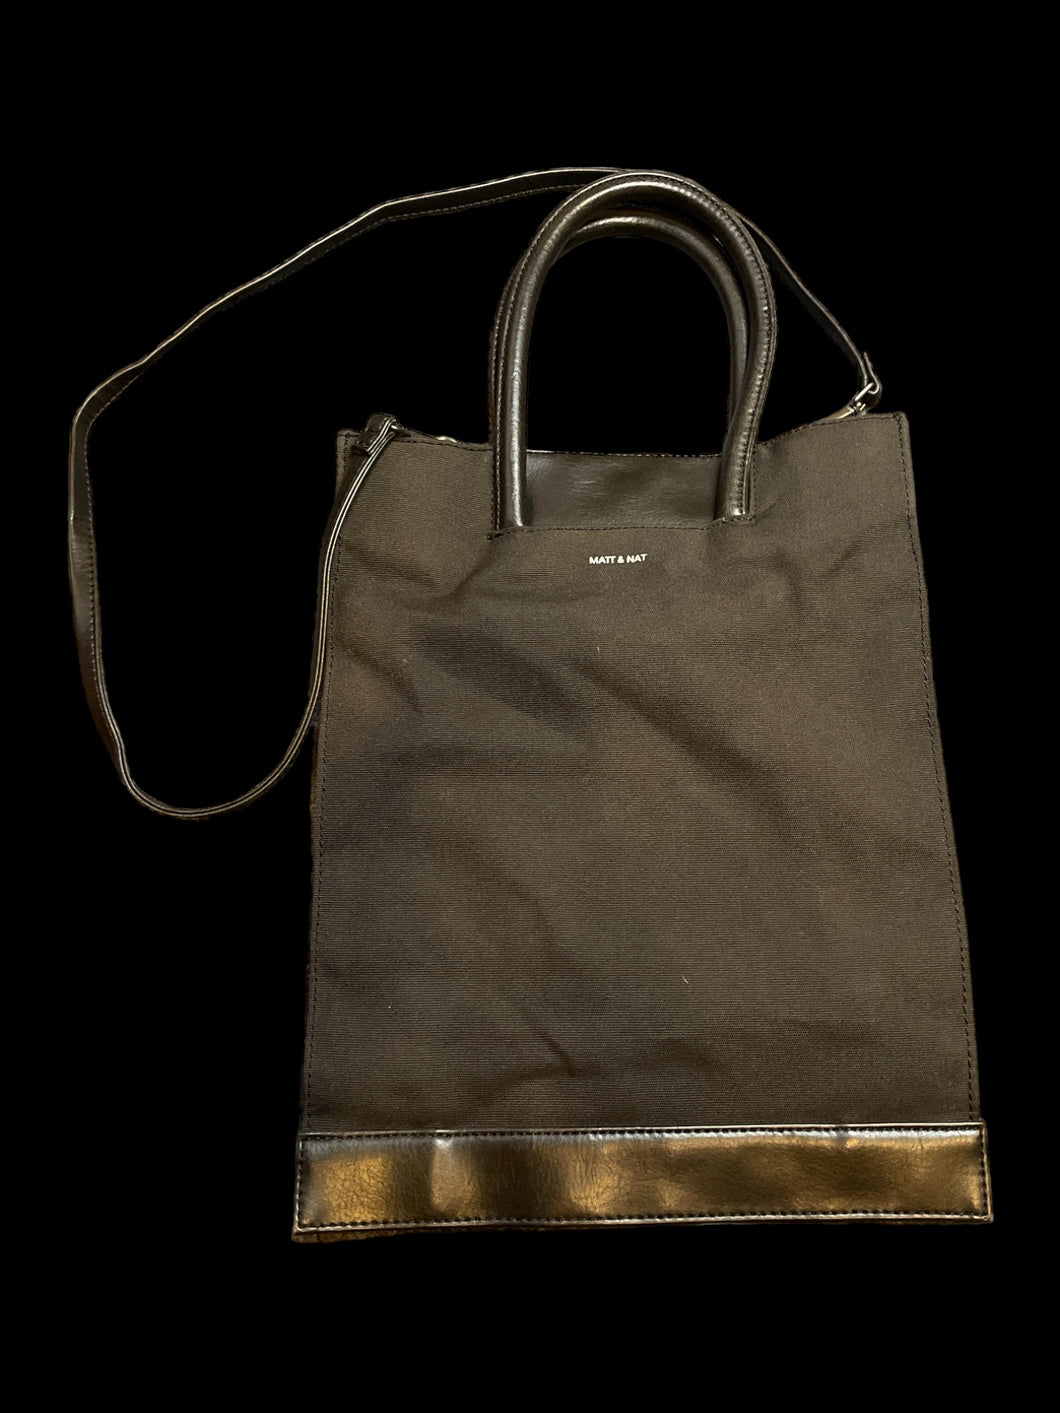 Black canvas & faux leather tote bag w/ removable cross body strap, magnetic clasp, & inner pockets